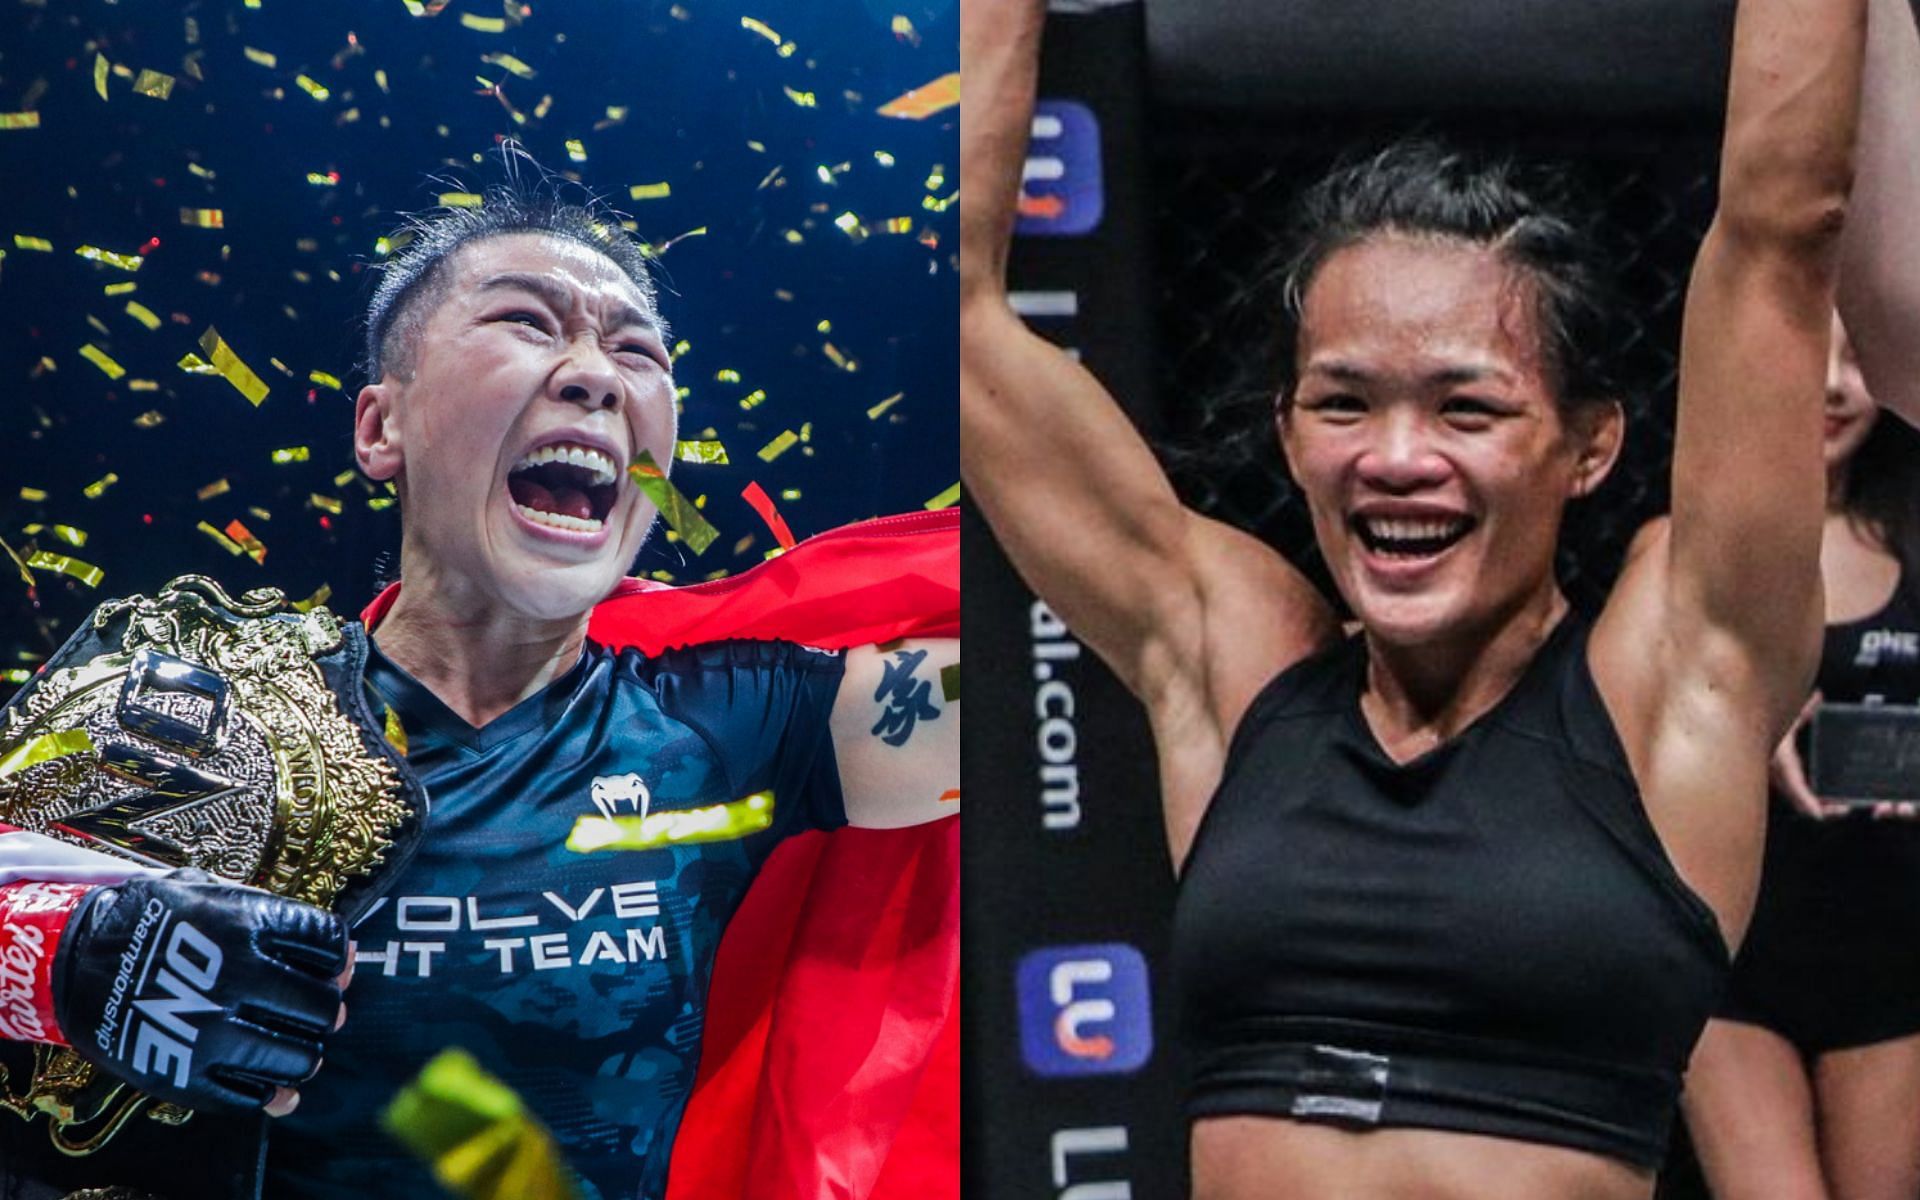 Tiffany Teo (right) takes in valuable lessons from her losses against XJN (left) | Photo: ONE Championship